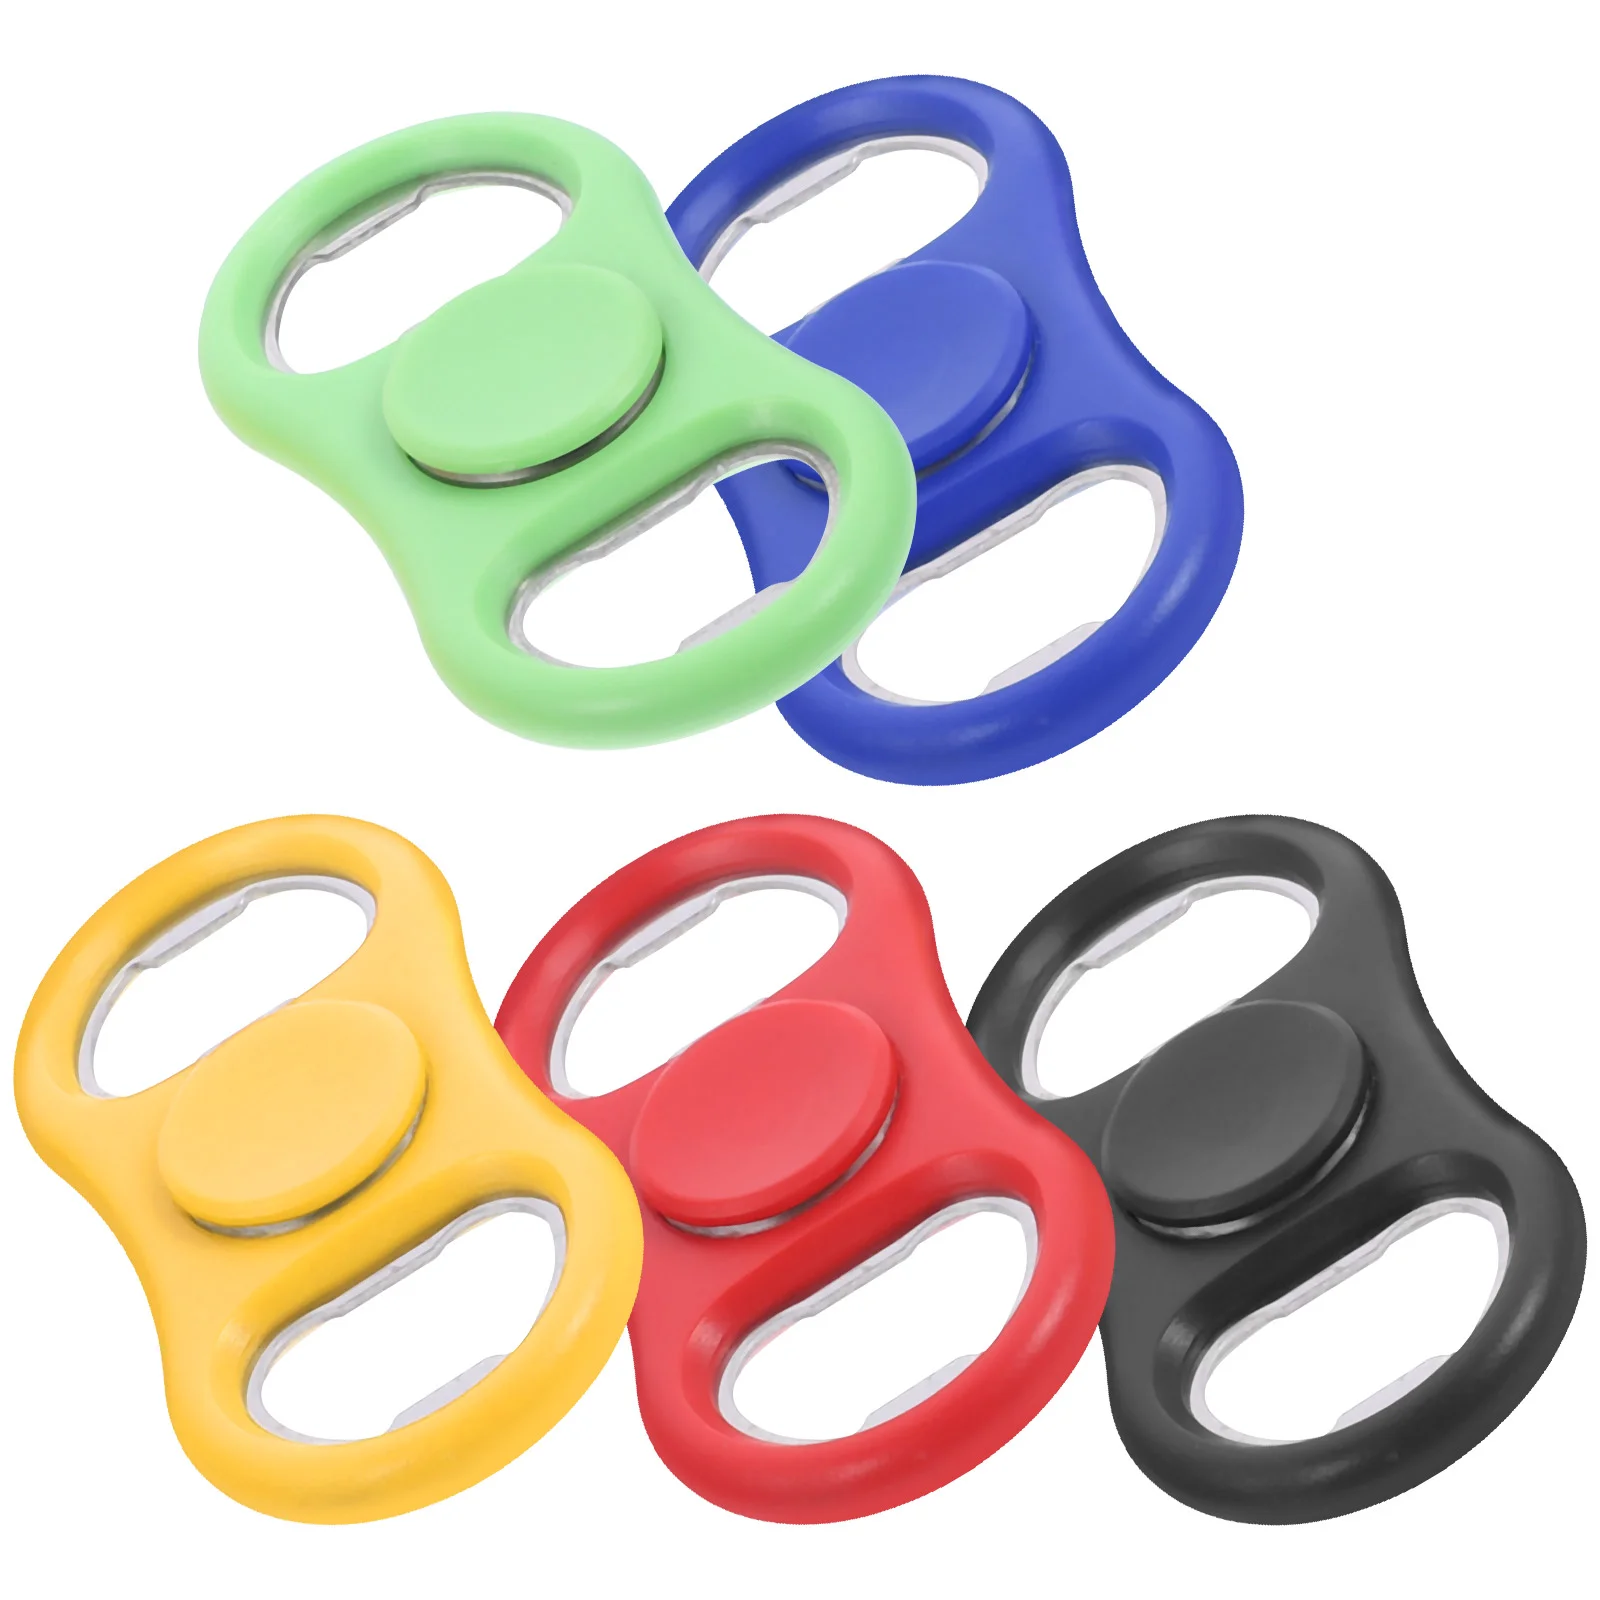 

5 Pcs Bottle Lid Remover Beer Open Tools Soda Opener Openers Rotation Manual Party Beverage